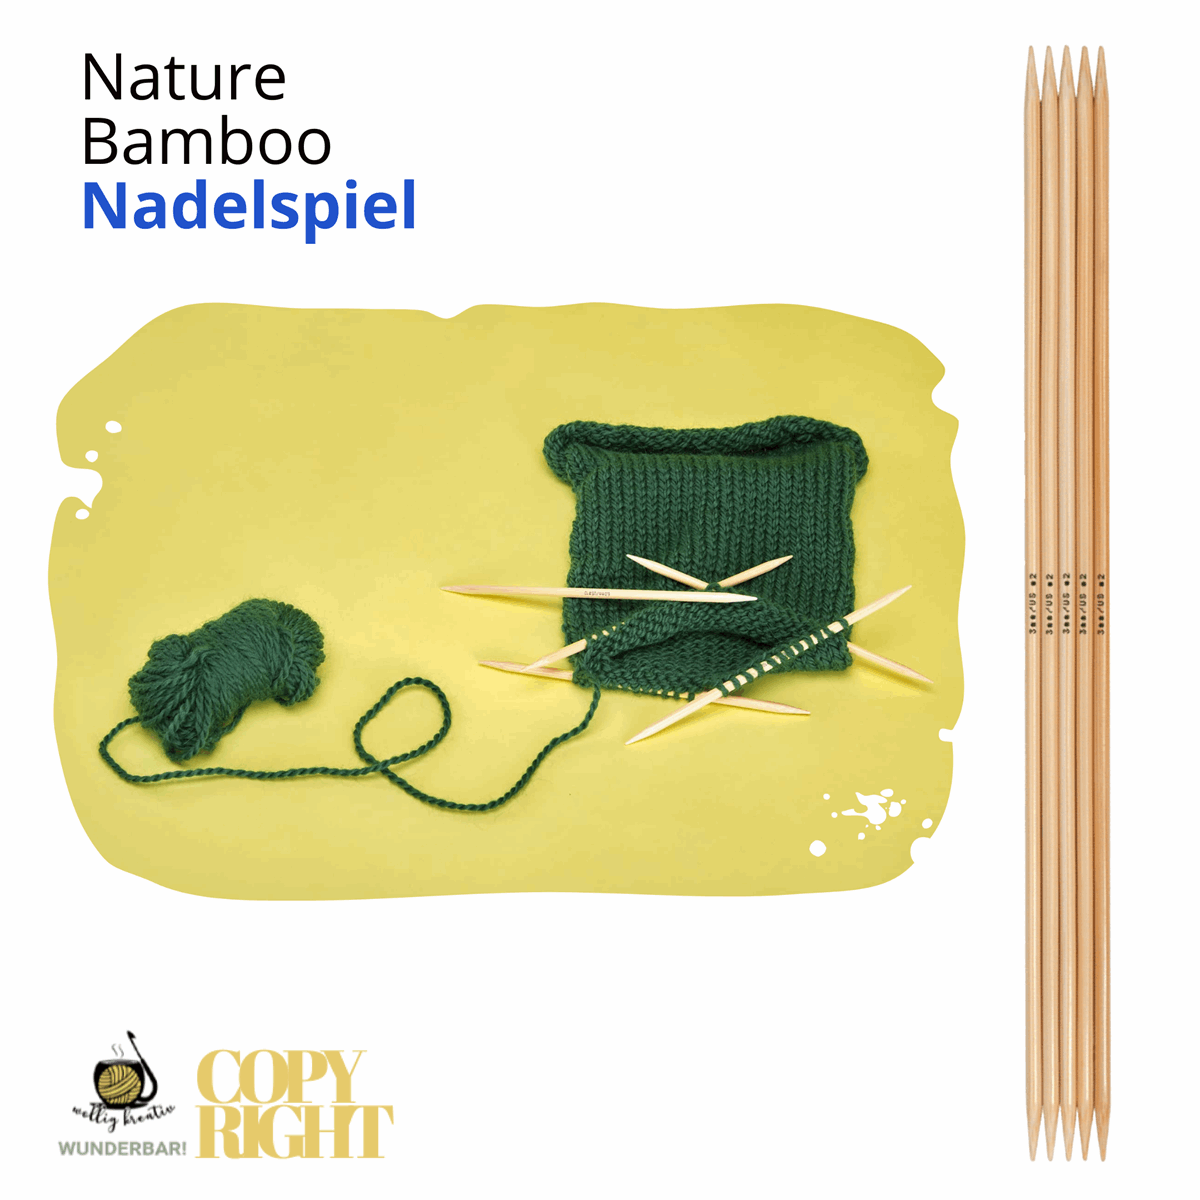 Addi, Nature Bamboo double pointed needles, 65012, size 3.5 length 20 cm